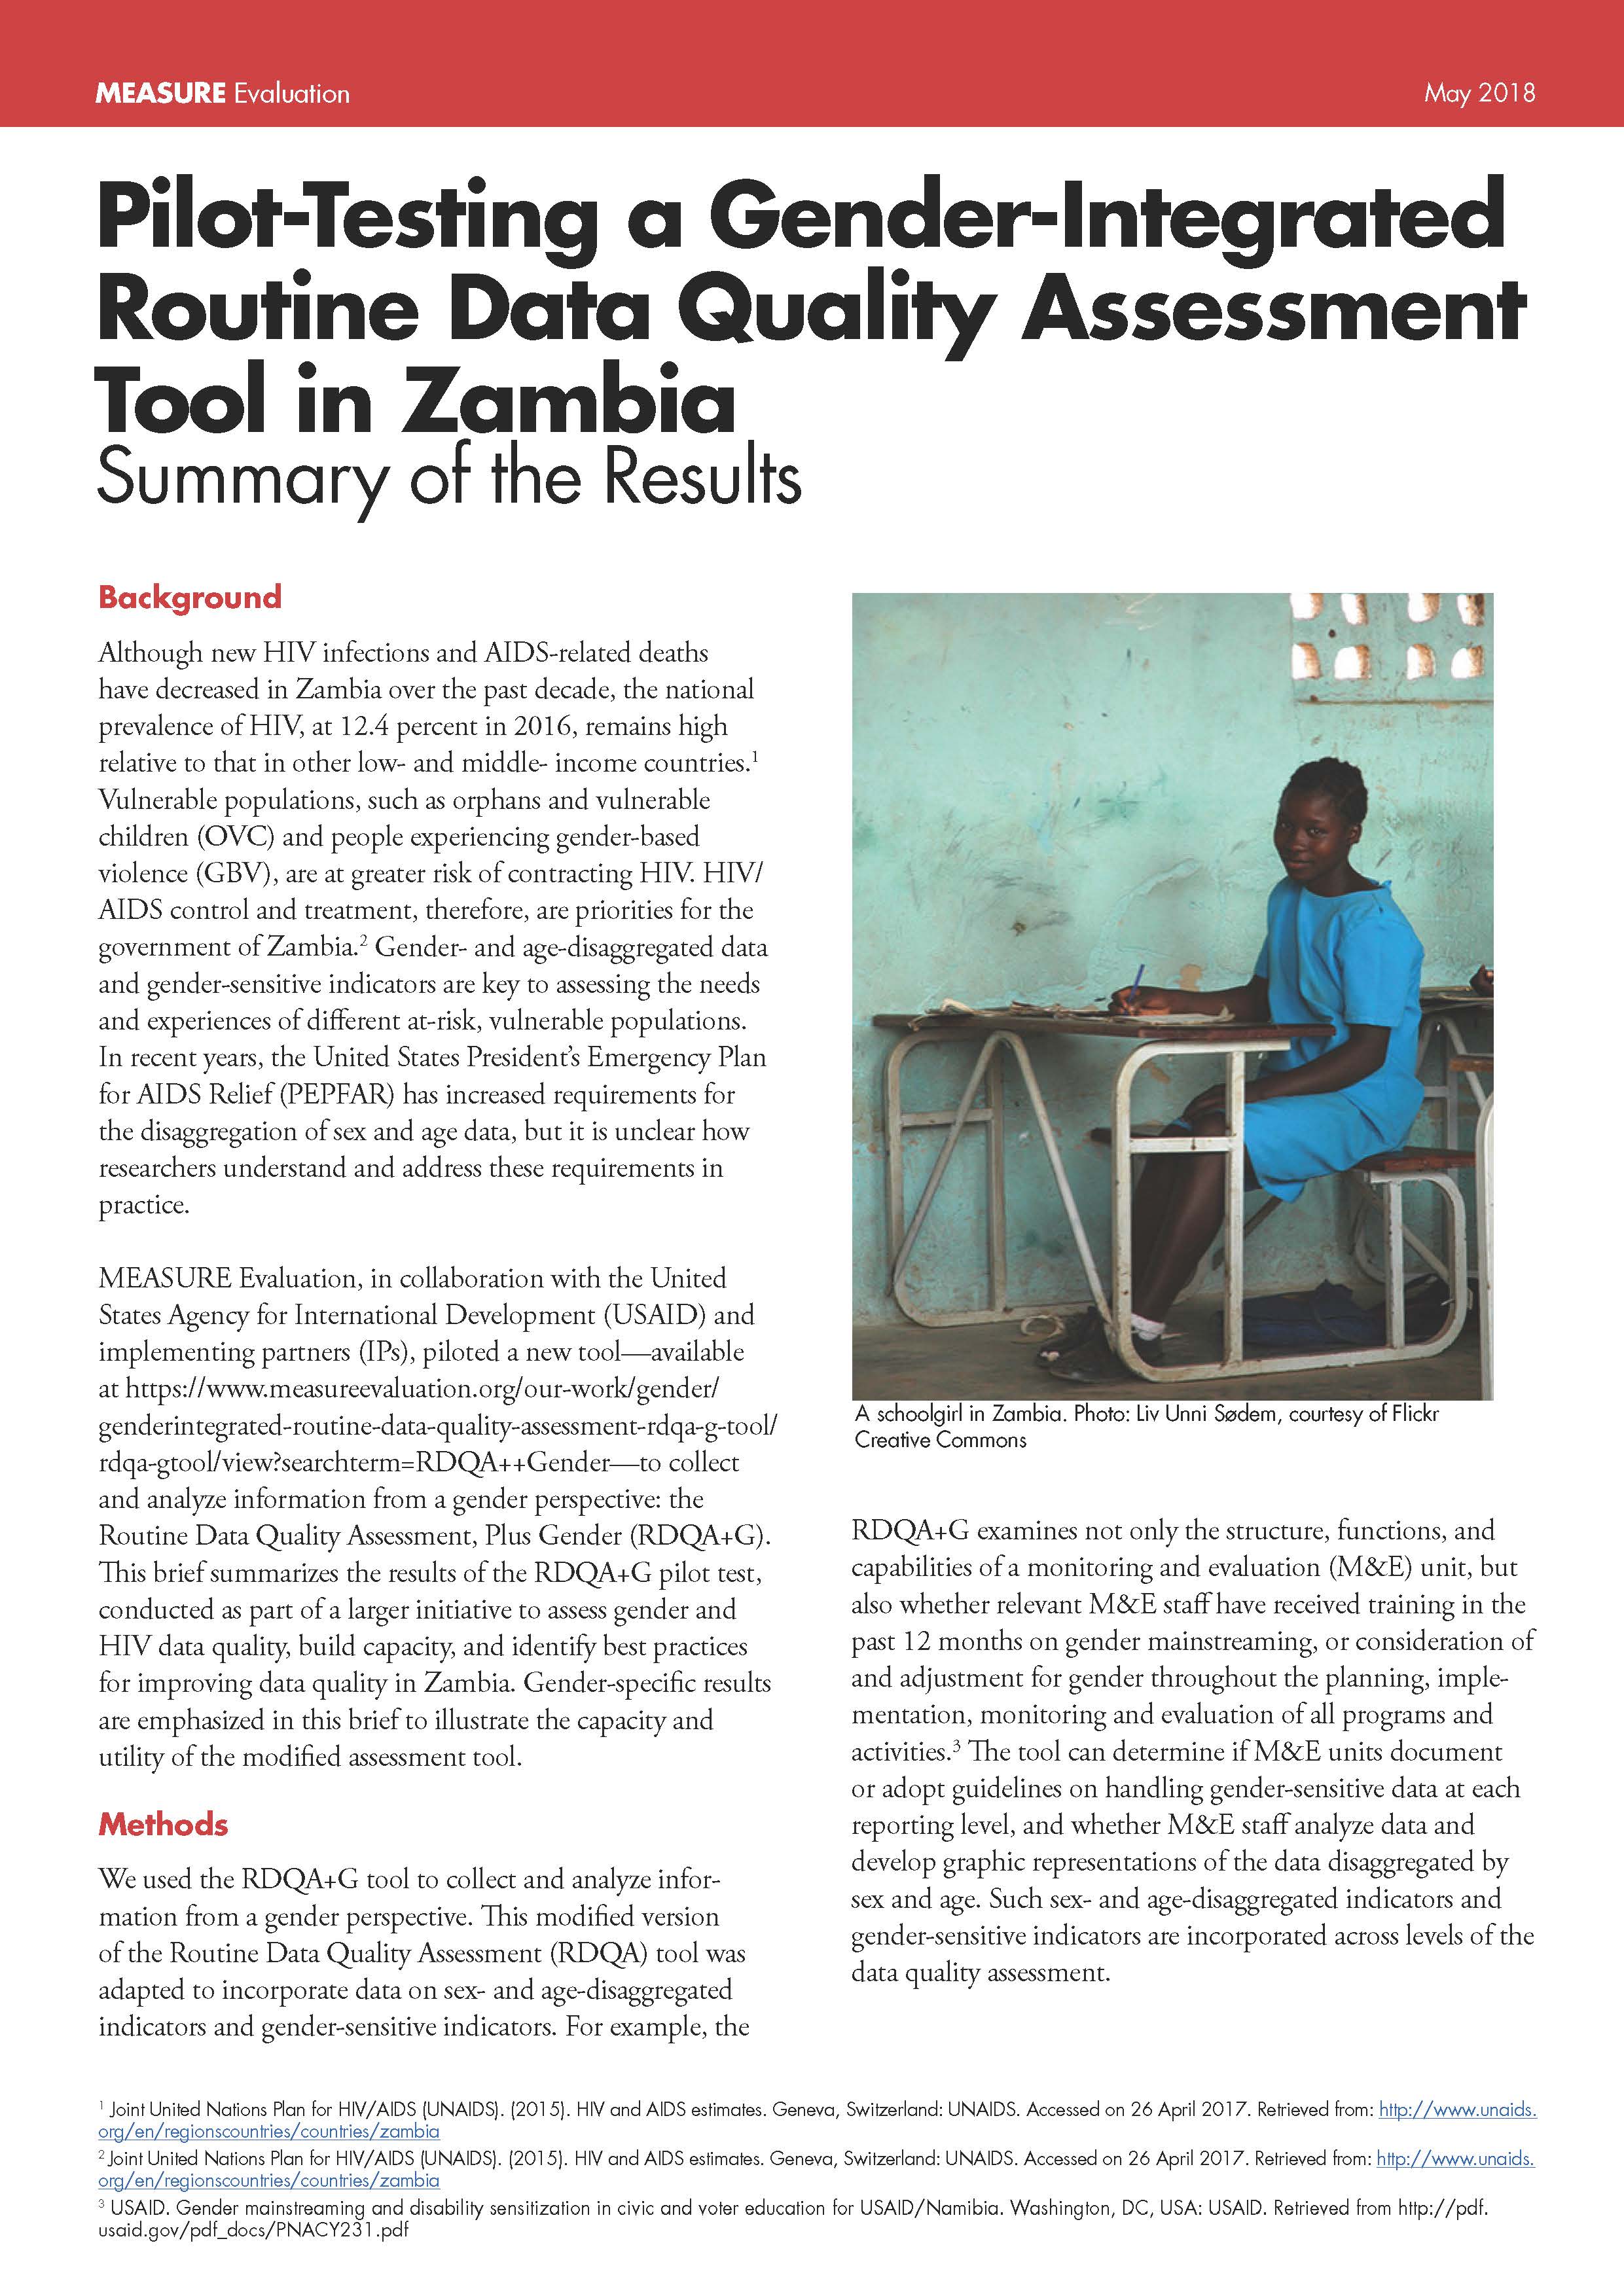 Pilot-Testing a Gender-Integrated Routine Data Quality Assessment Tool in Zambia: Summary of the Results